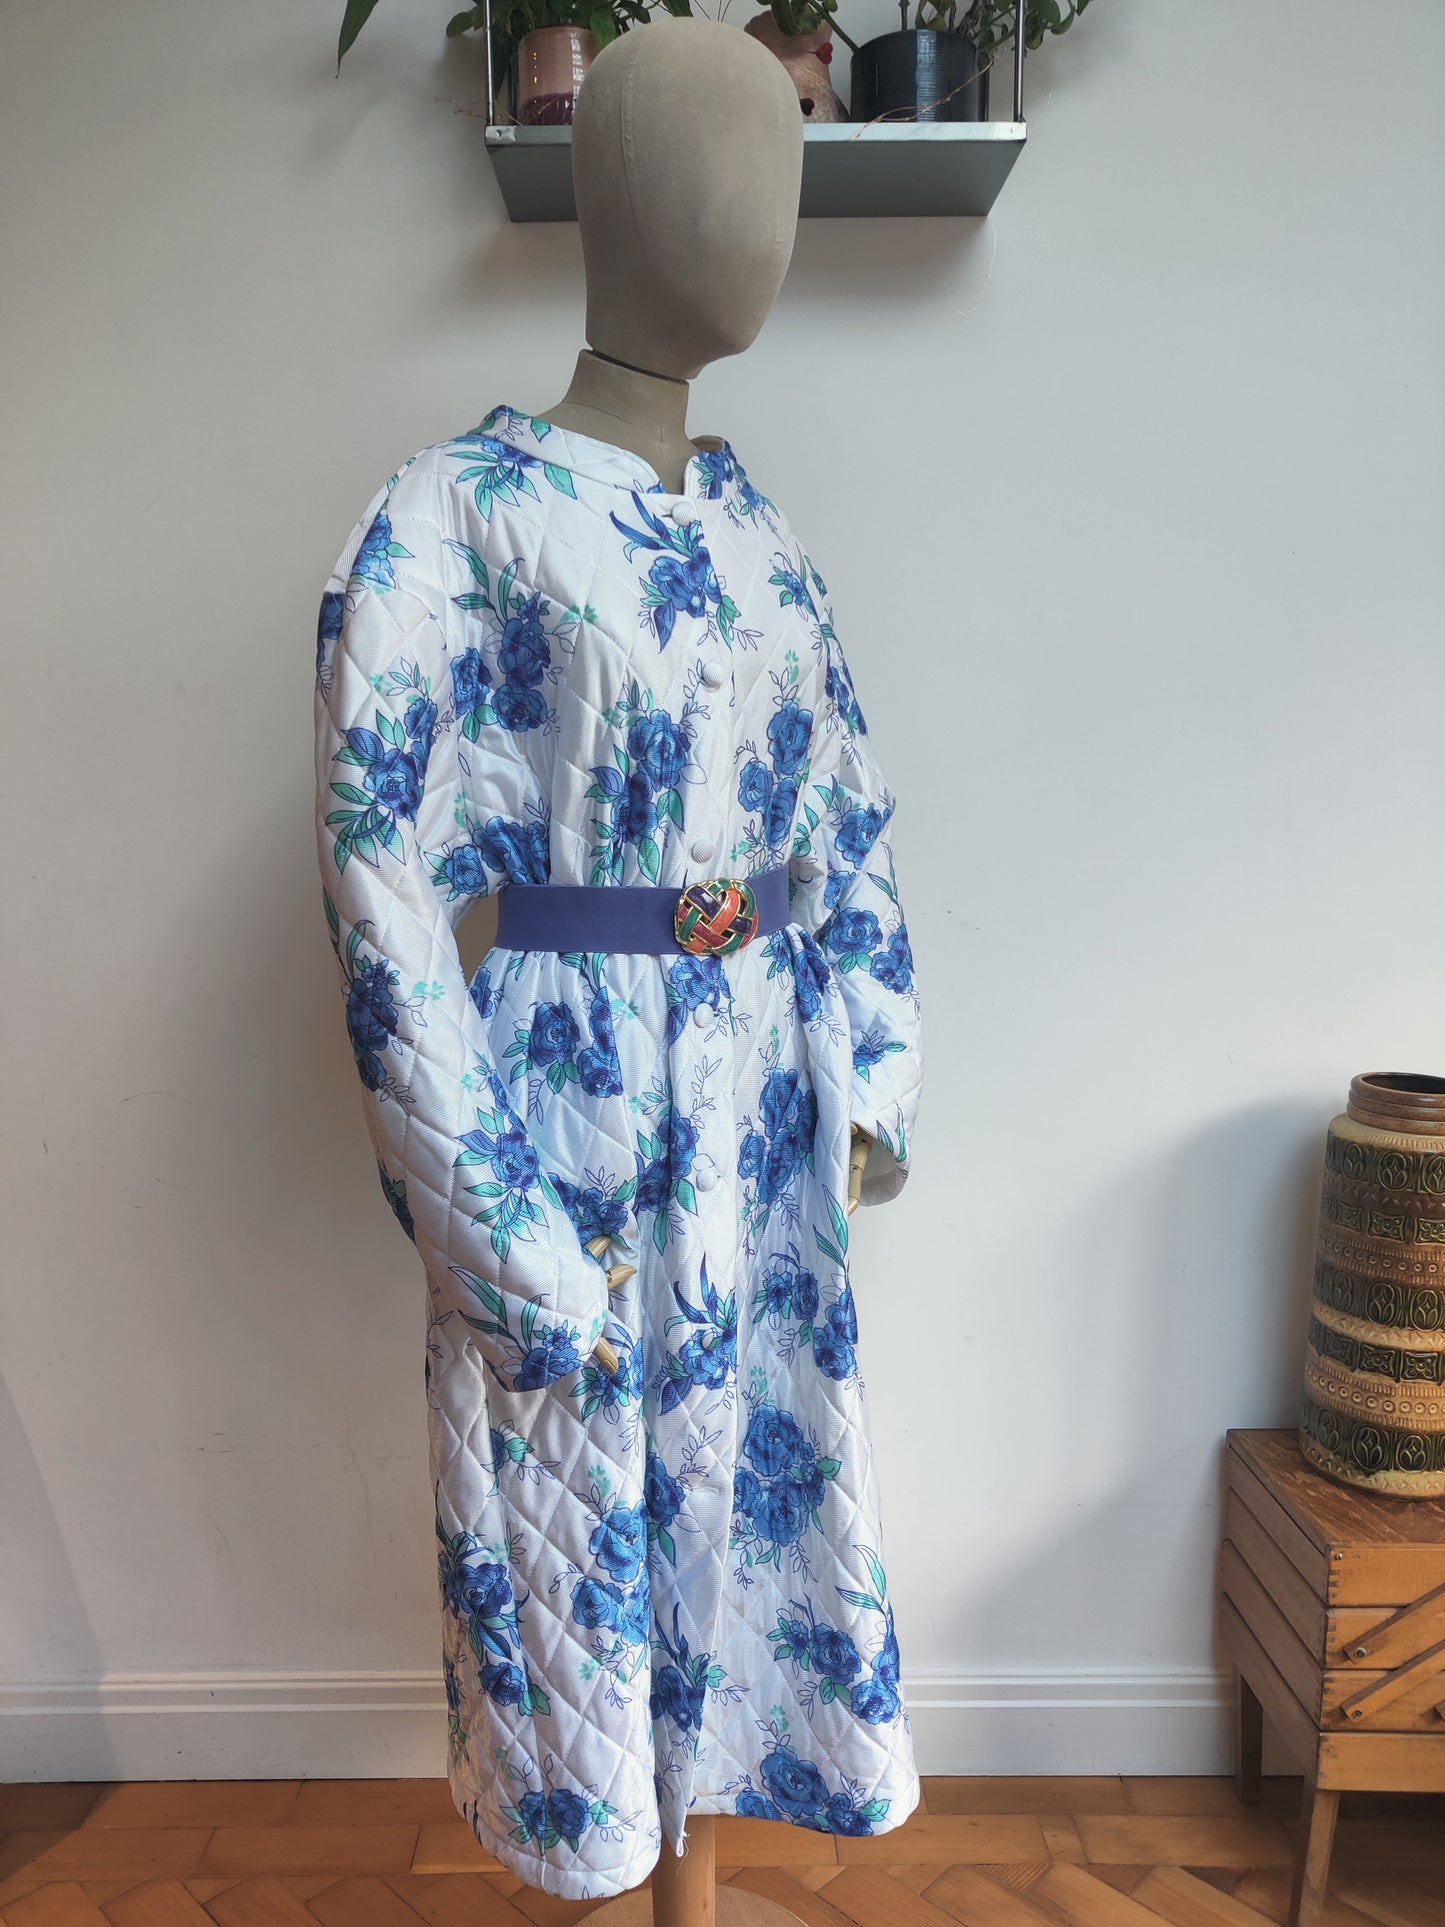 Pretty vintage housecoat with blue floral print. Size 24.